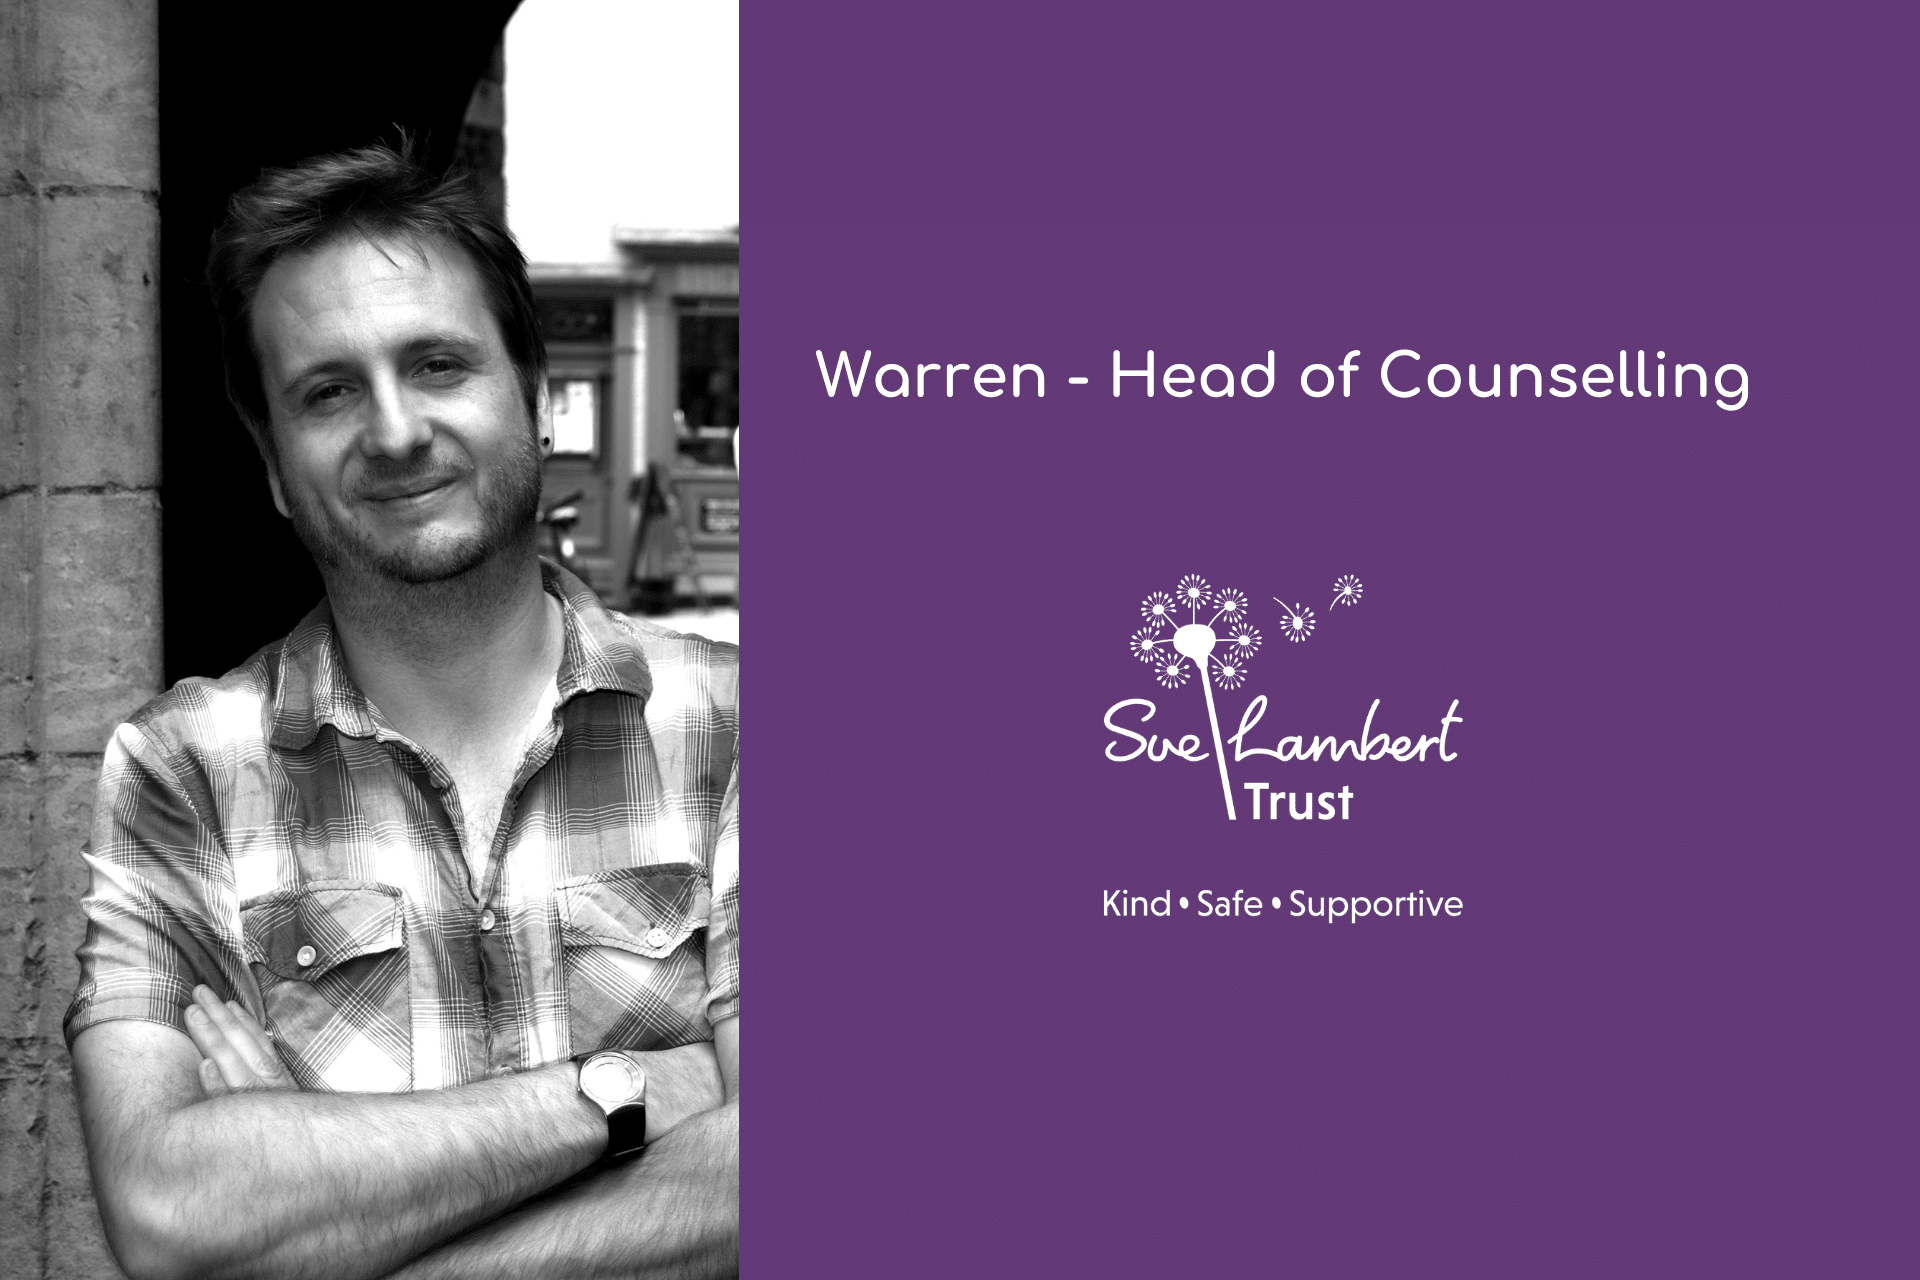 Getting to know warren - head of counselling image of Warren